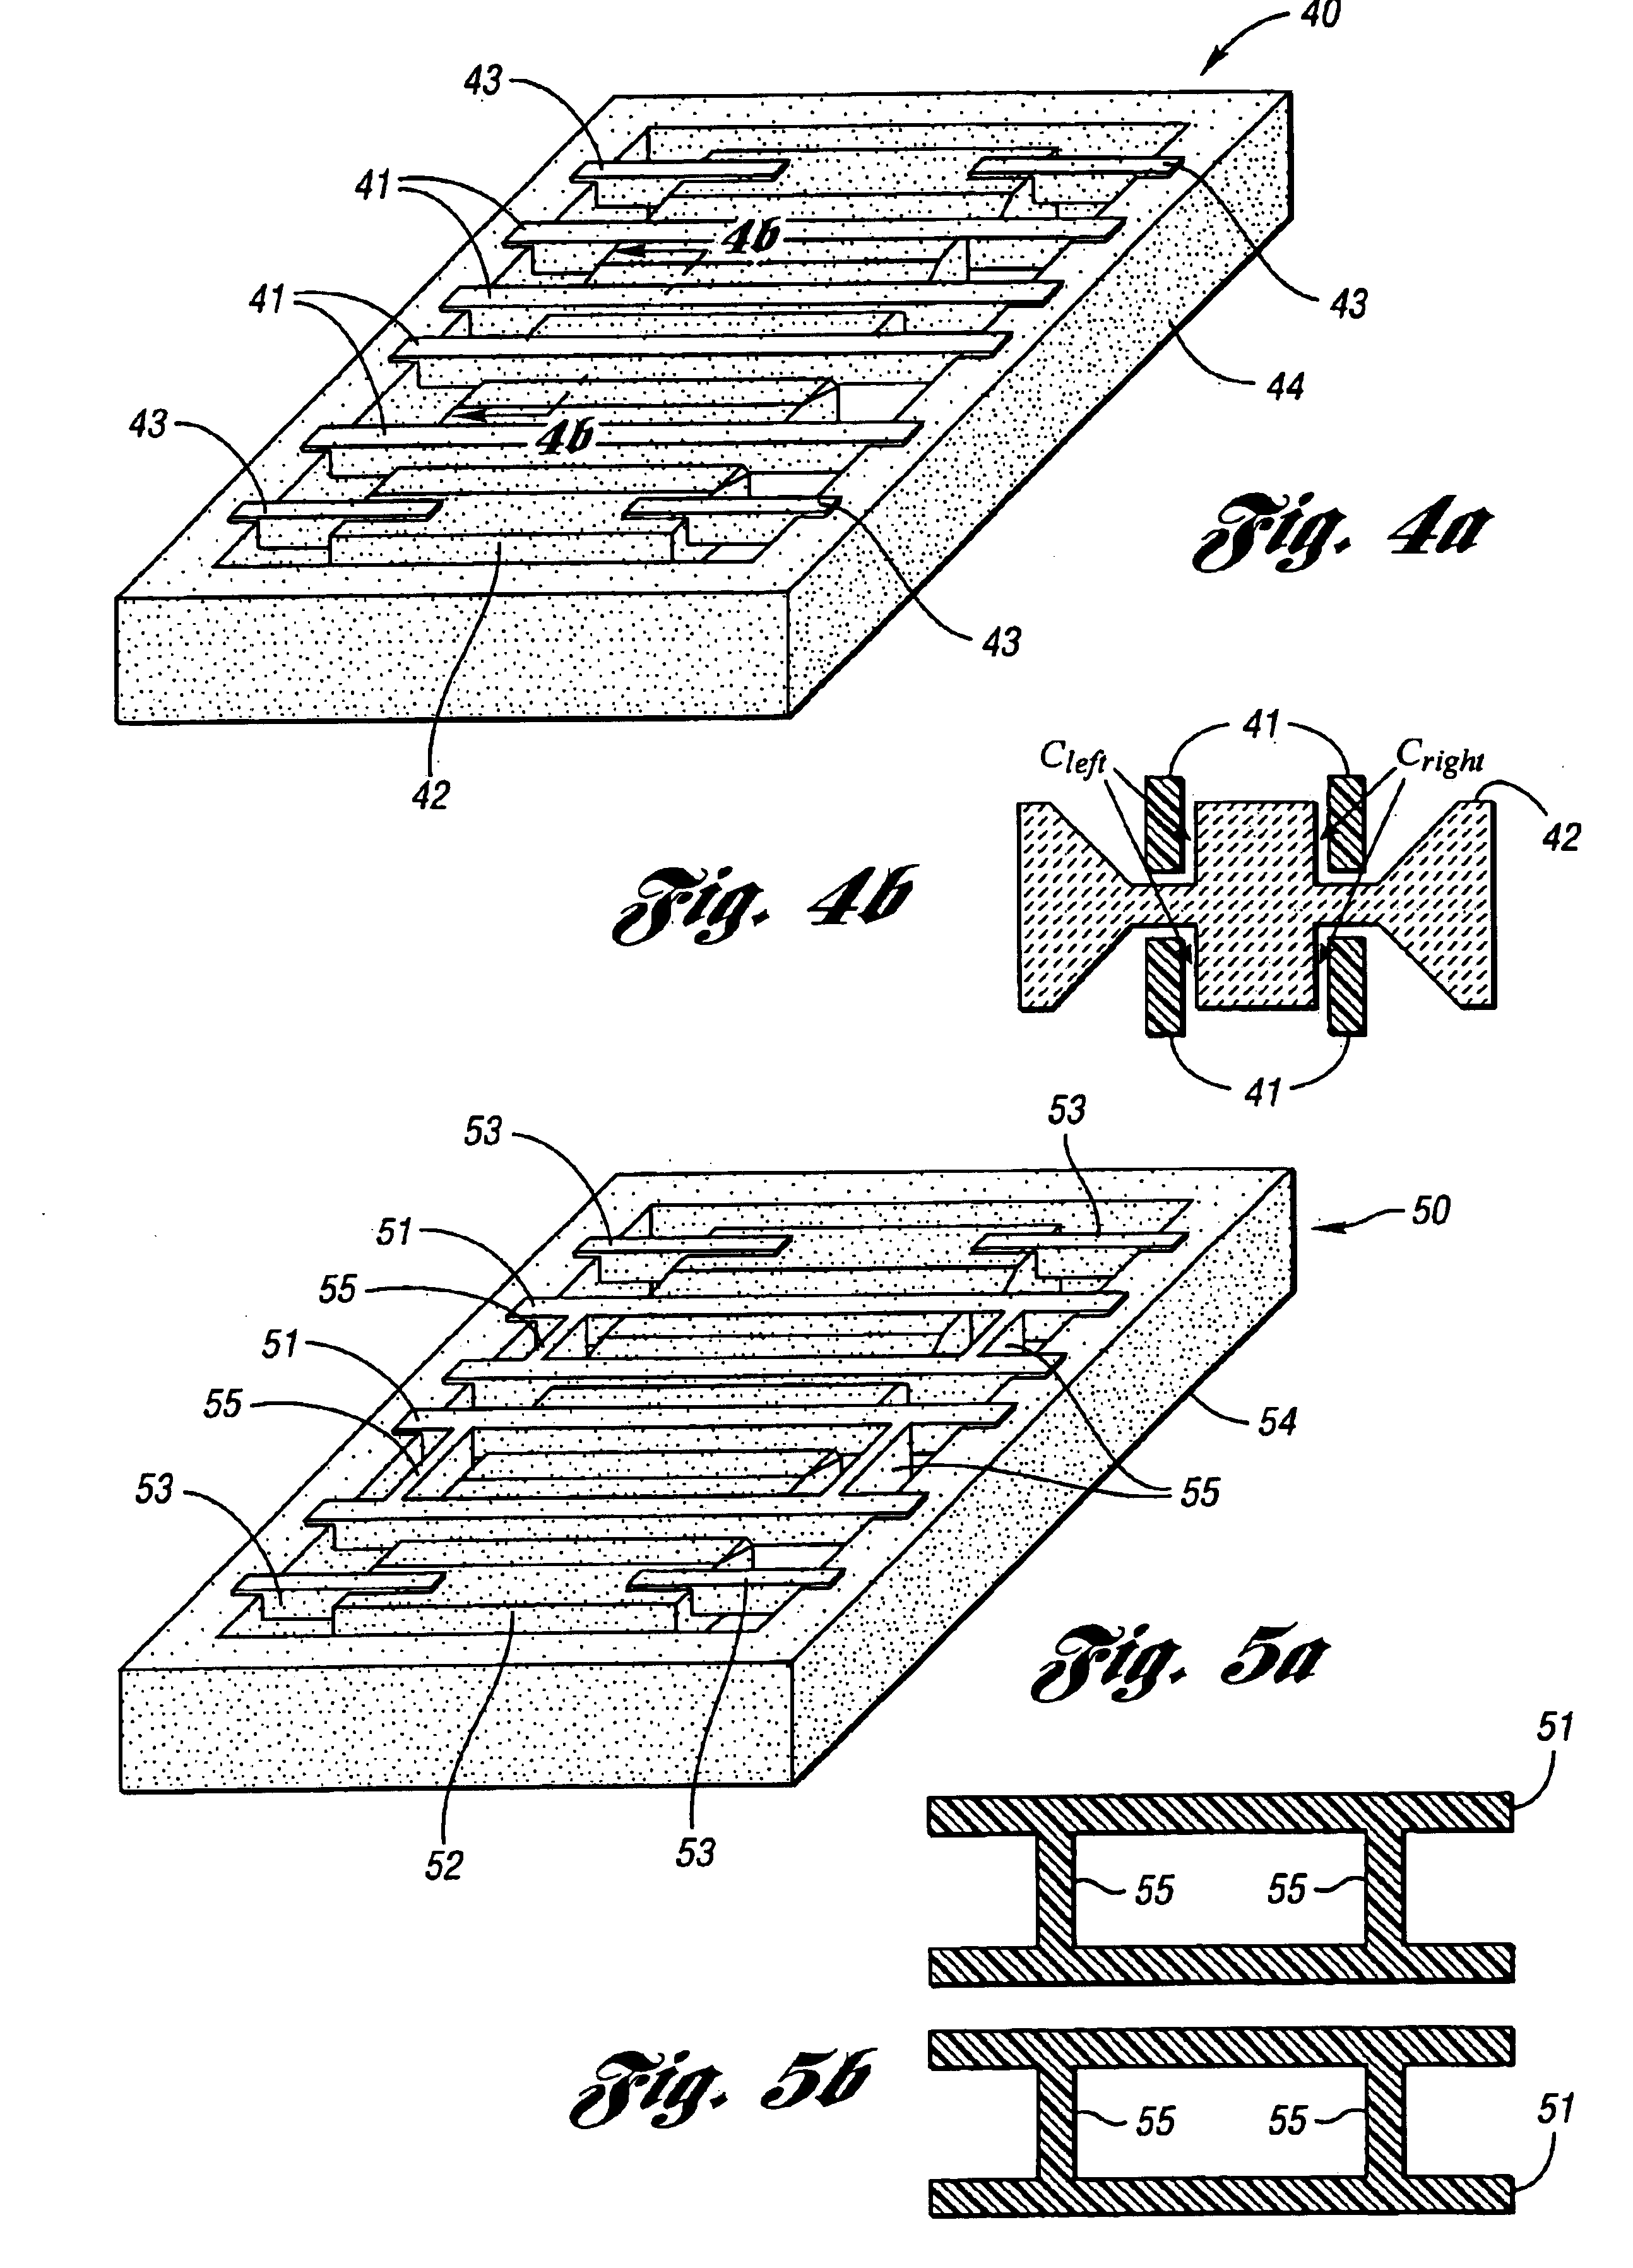 Micromachined capacitive lateral accelerometer device and monolithic, three-axis accelerometer having same